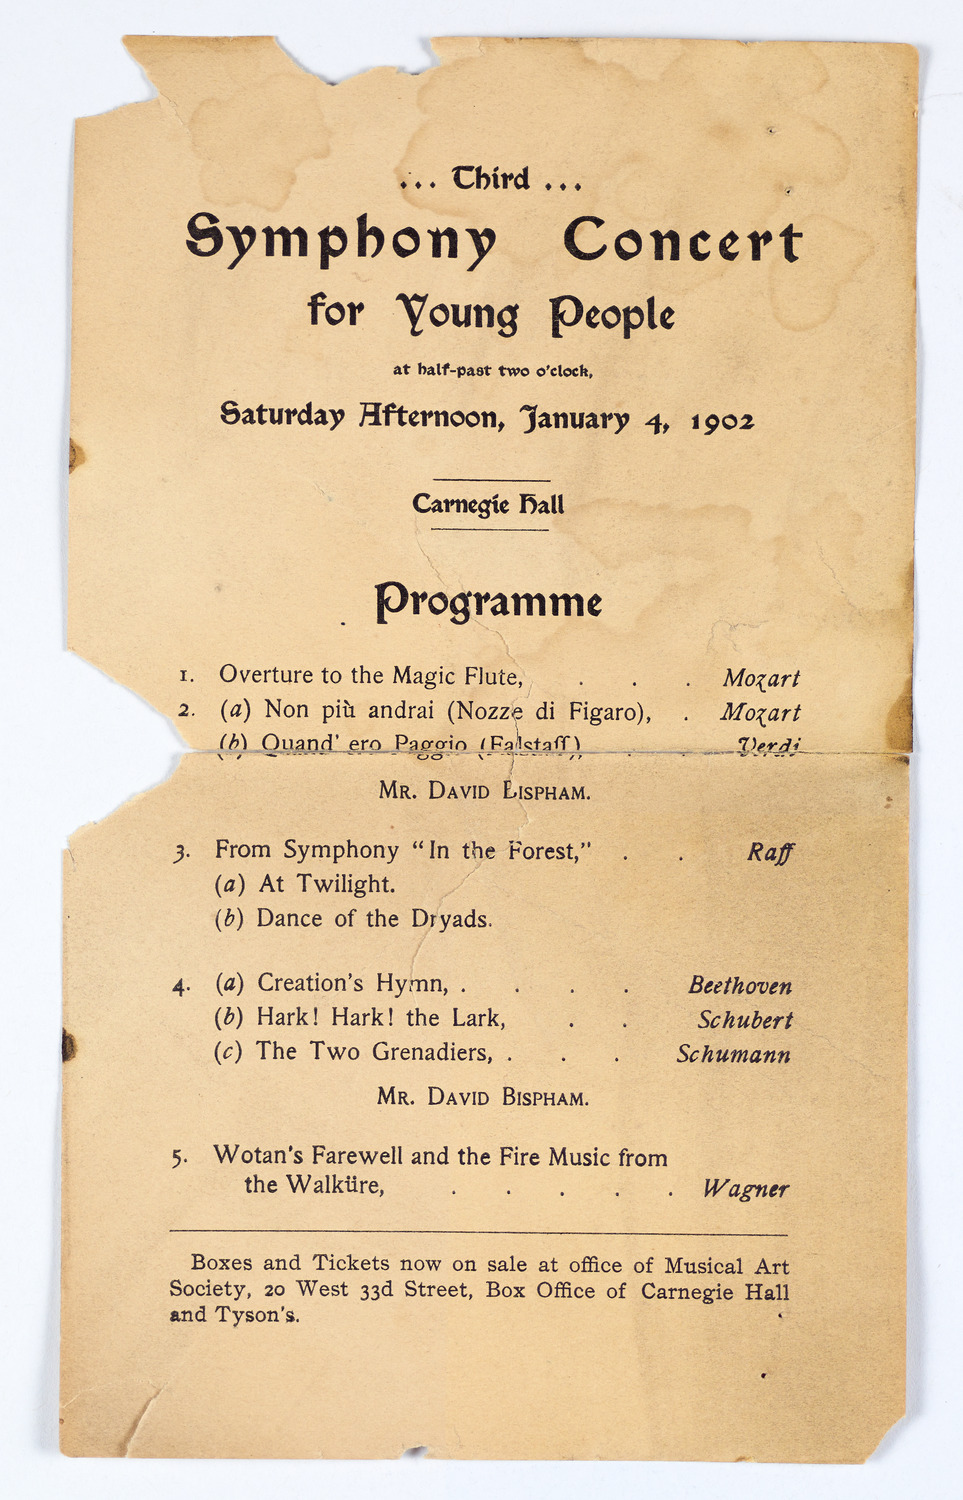 Symphony Concert for Young People, January 4, 1902